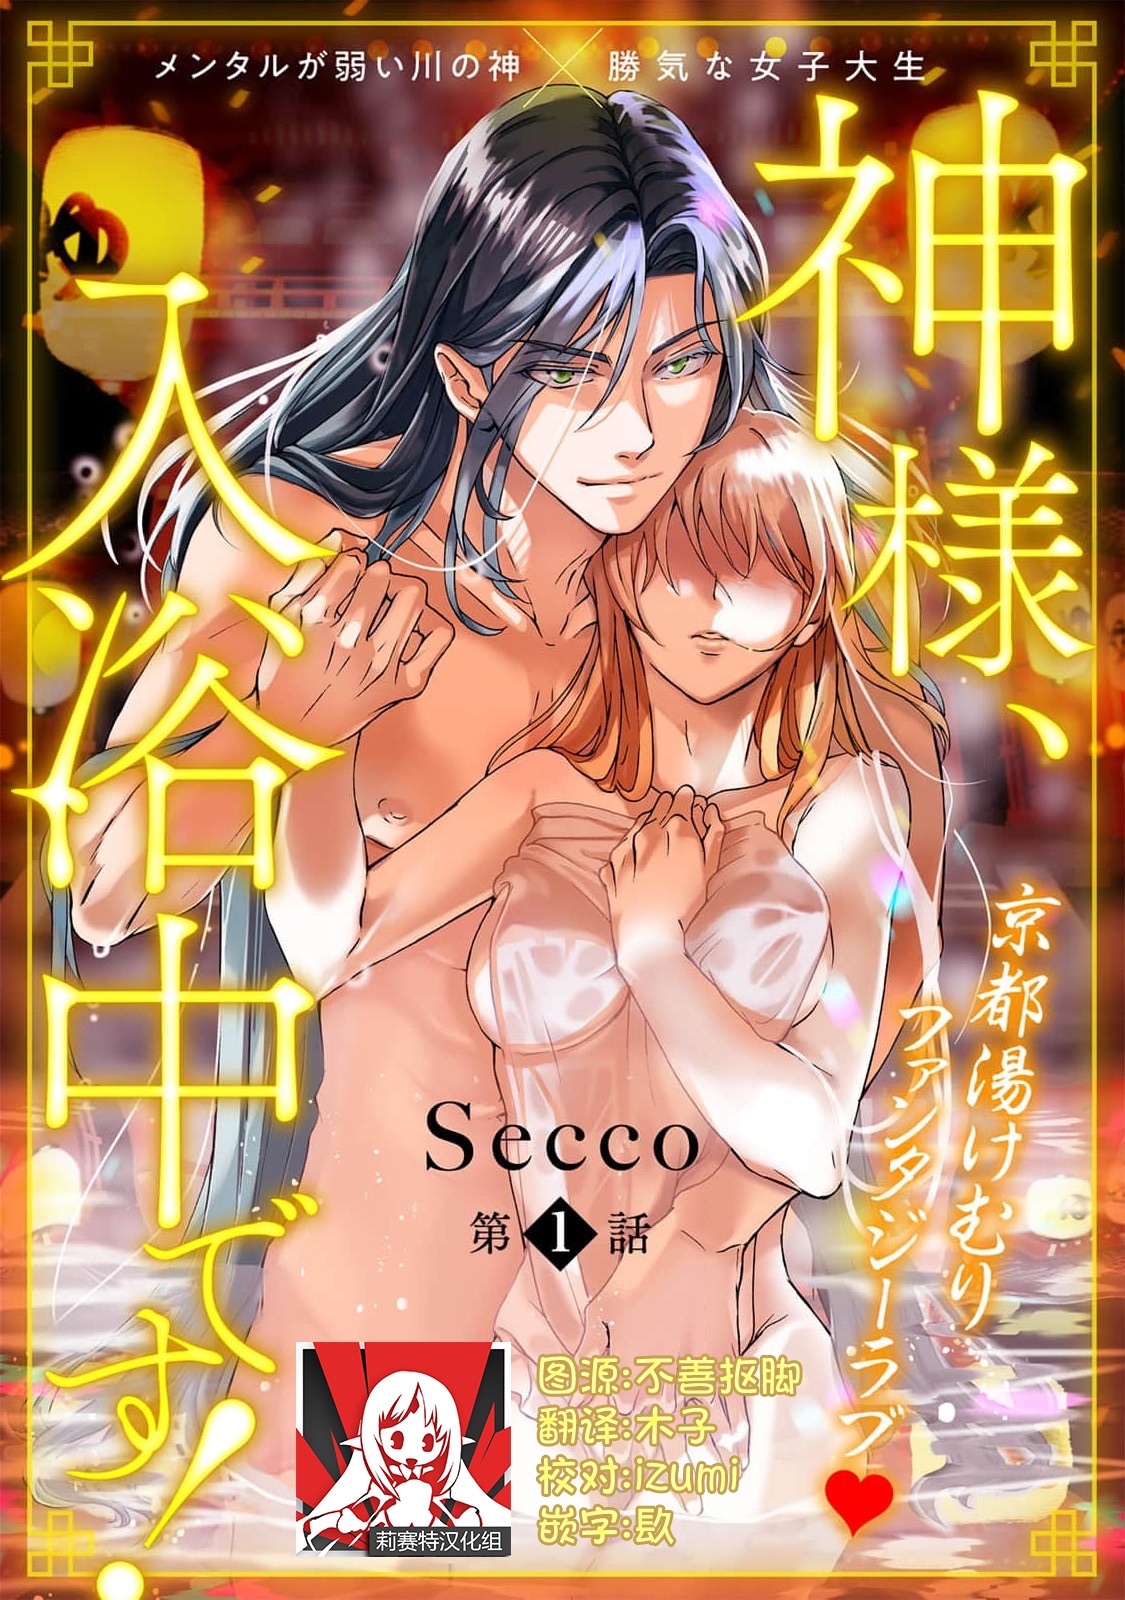 [Secco] 神様、入浴中です！1 - 情色卡漫 -